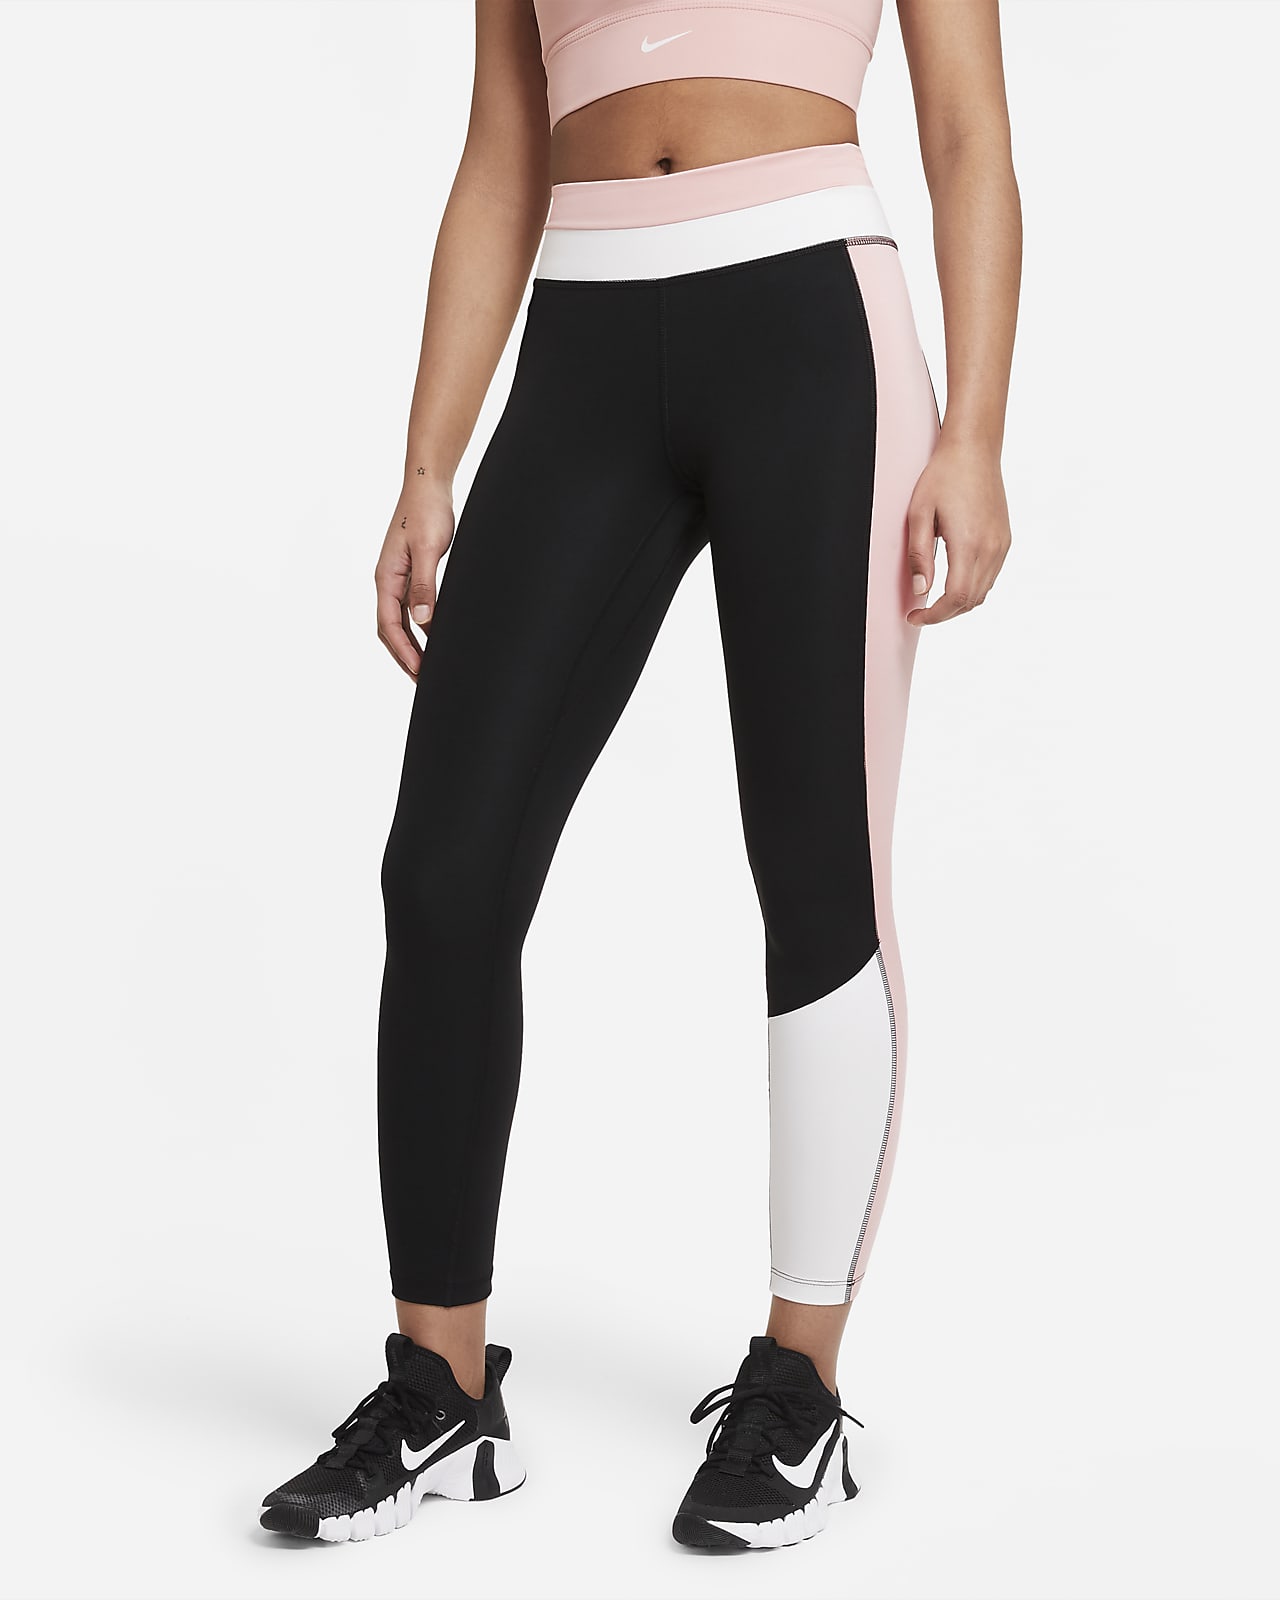 nike leggings with nike down the side